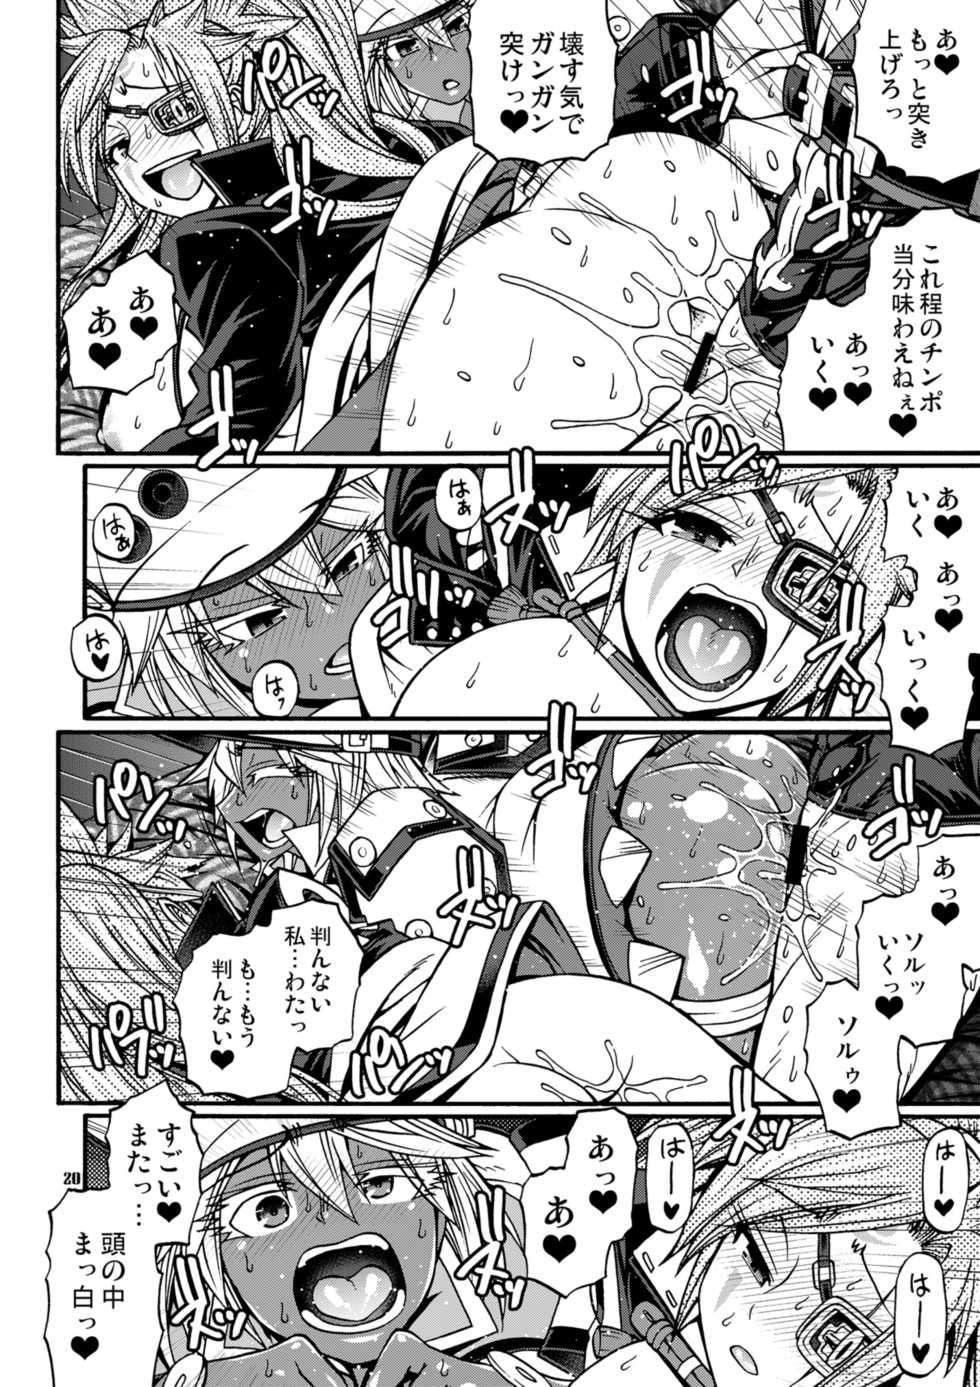 [CELLULOID-ACME (Chiba Toshirou)] Do what you wanna do (Guilty Gear) [Digital] - Page 20